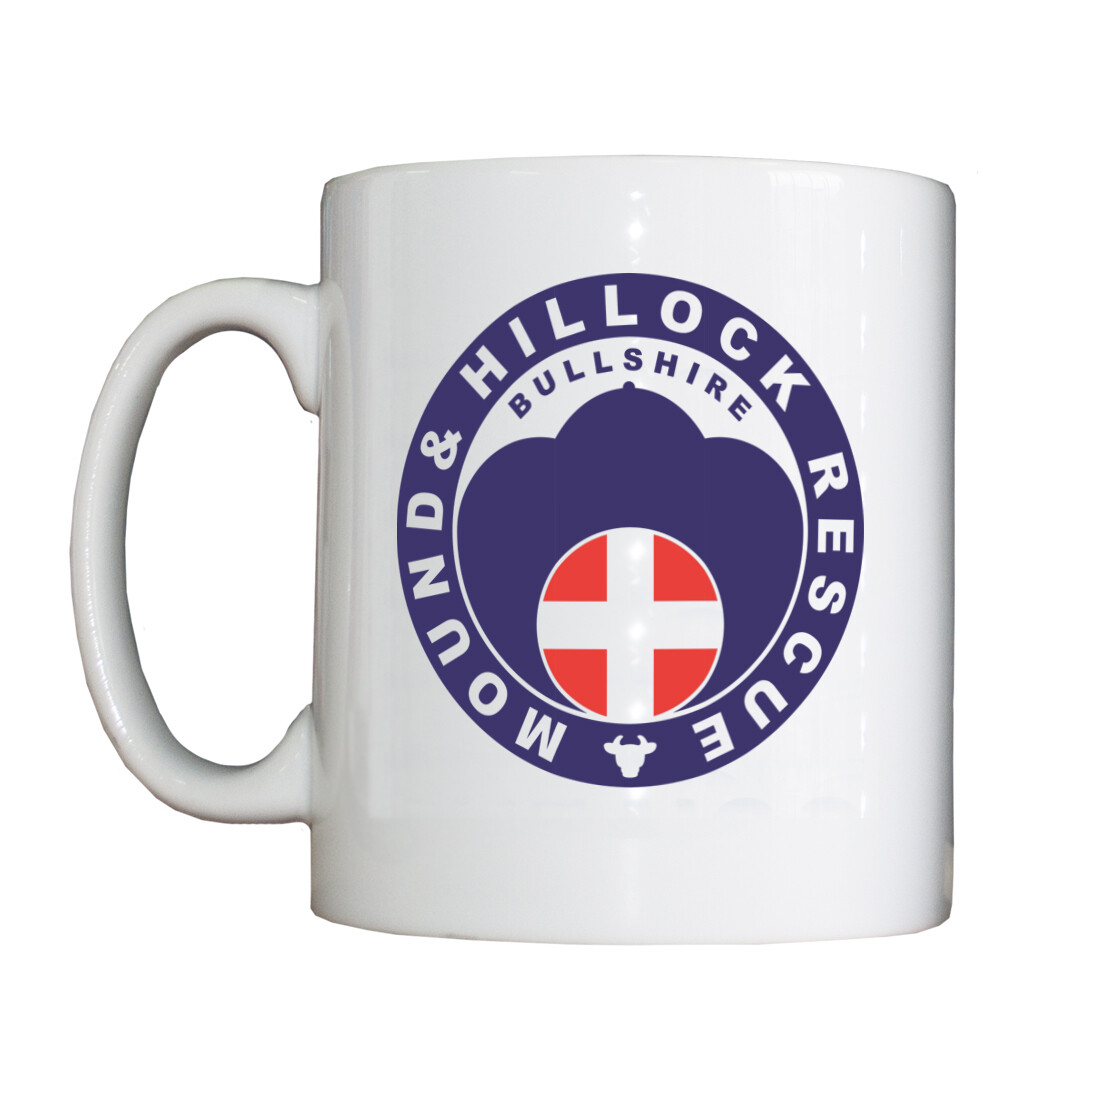 'Bullshire Mound and Hillock Rescue' Drinking Vessel